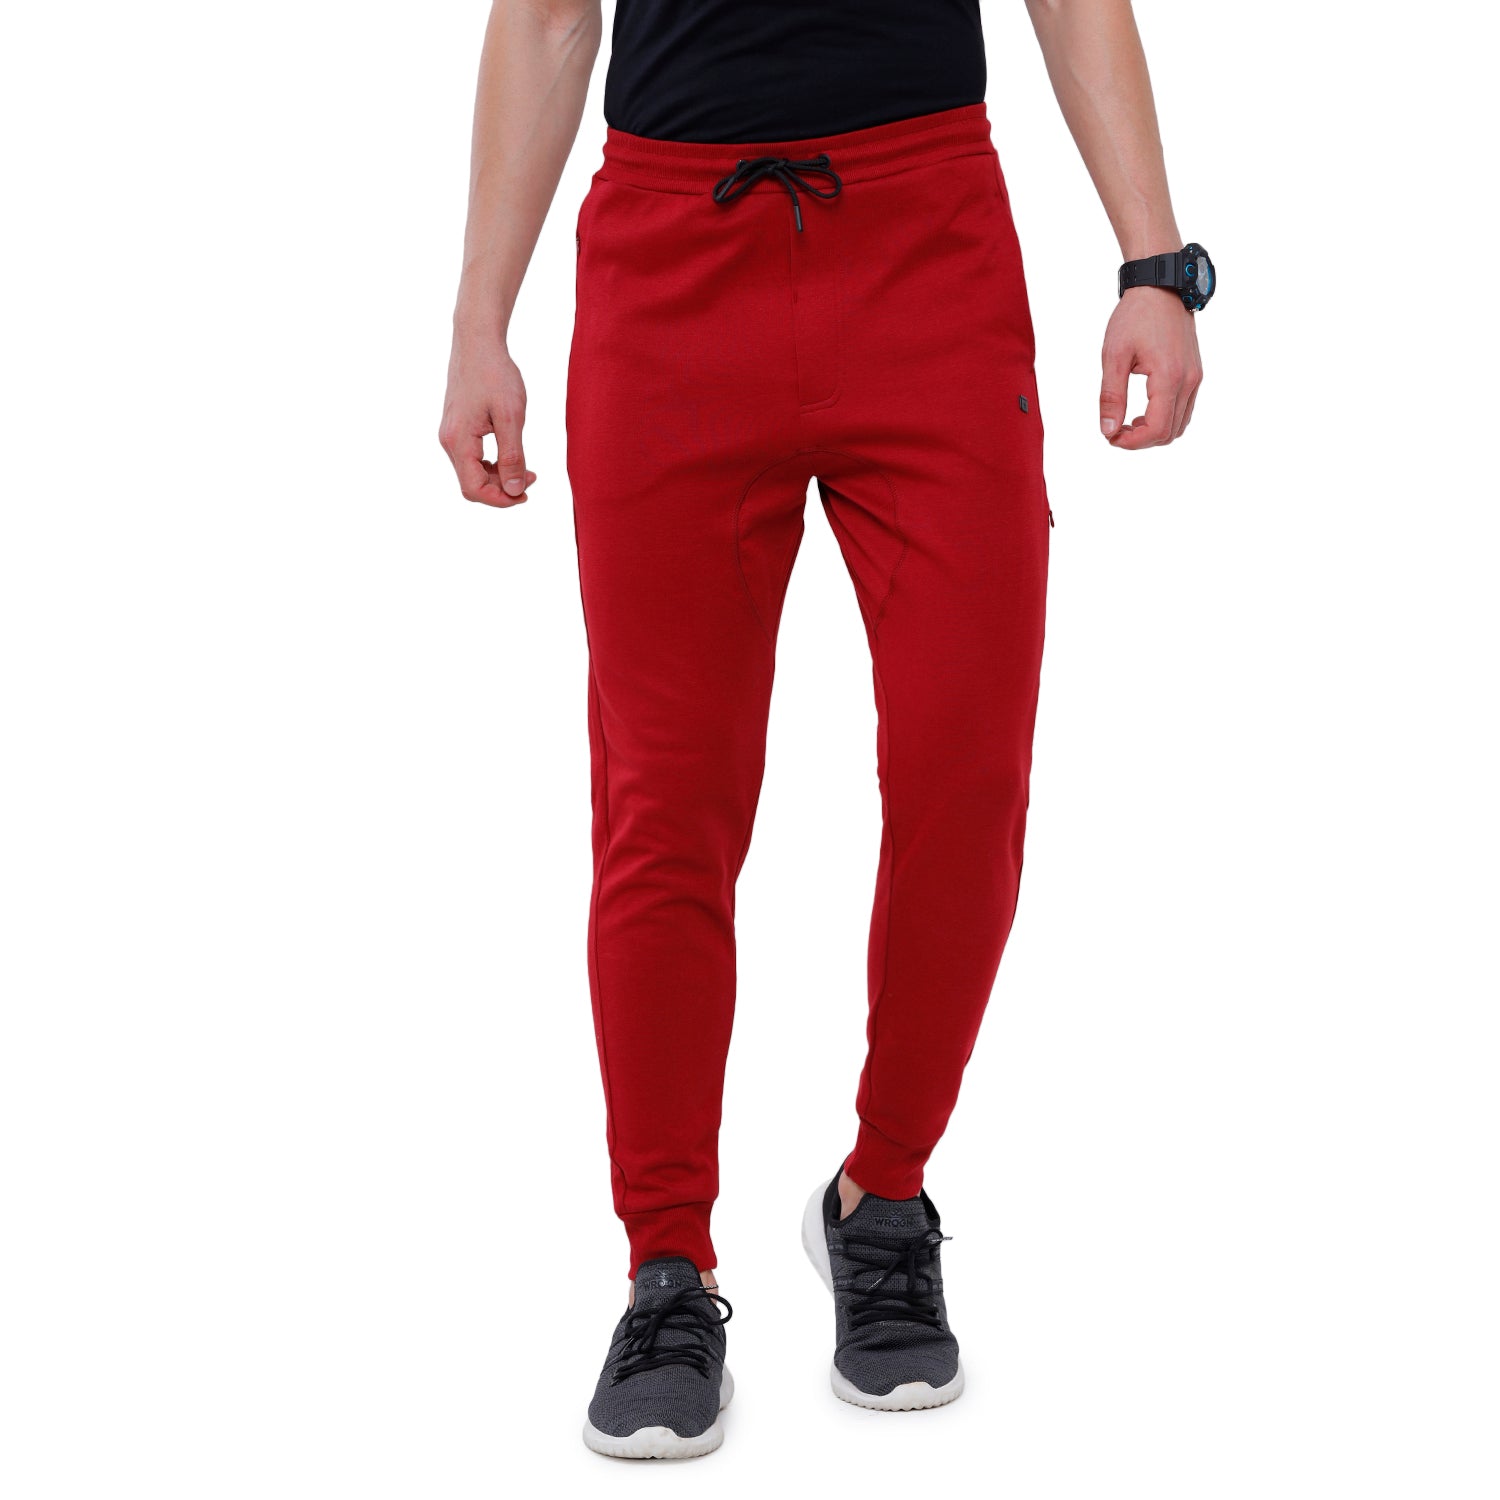 Nantucket Reds® Men's Pleated Front Pants - Murray's Toggery Shop